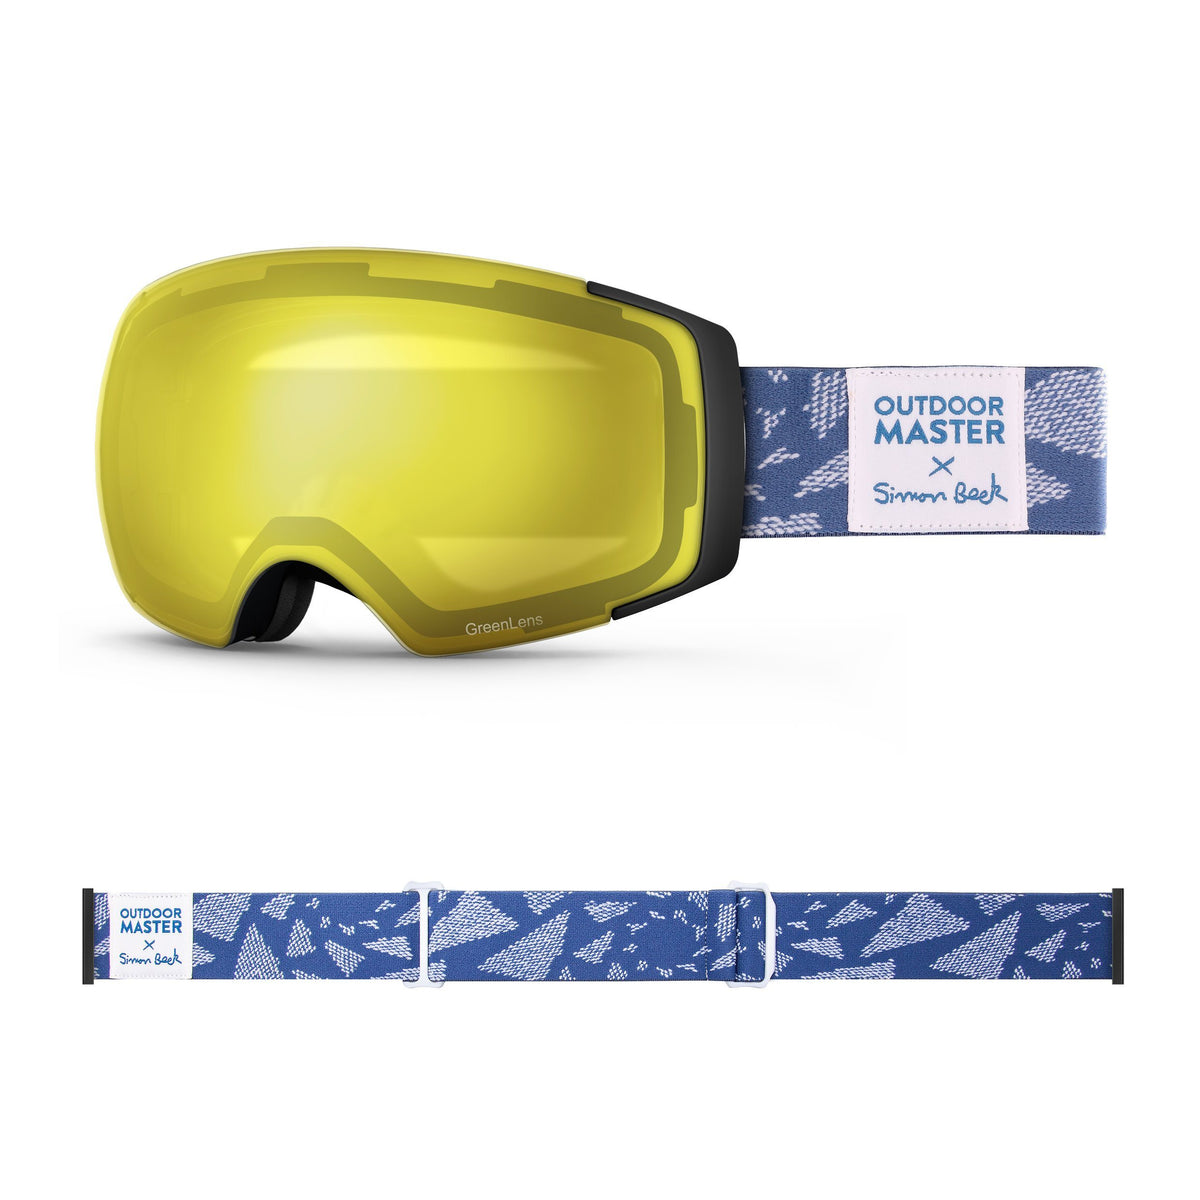 OutdoorMaster x Simon Beck Ski Goggles Pro Series - Snowshoeing Art Limited Edition OutdoorMaster GreenLens VLT 75% TAC Yellow Lens Polarized Flying Triangles